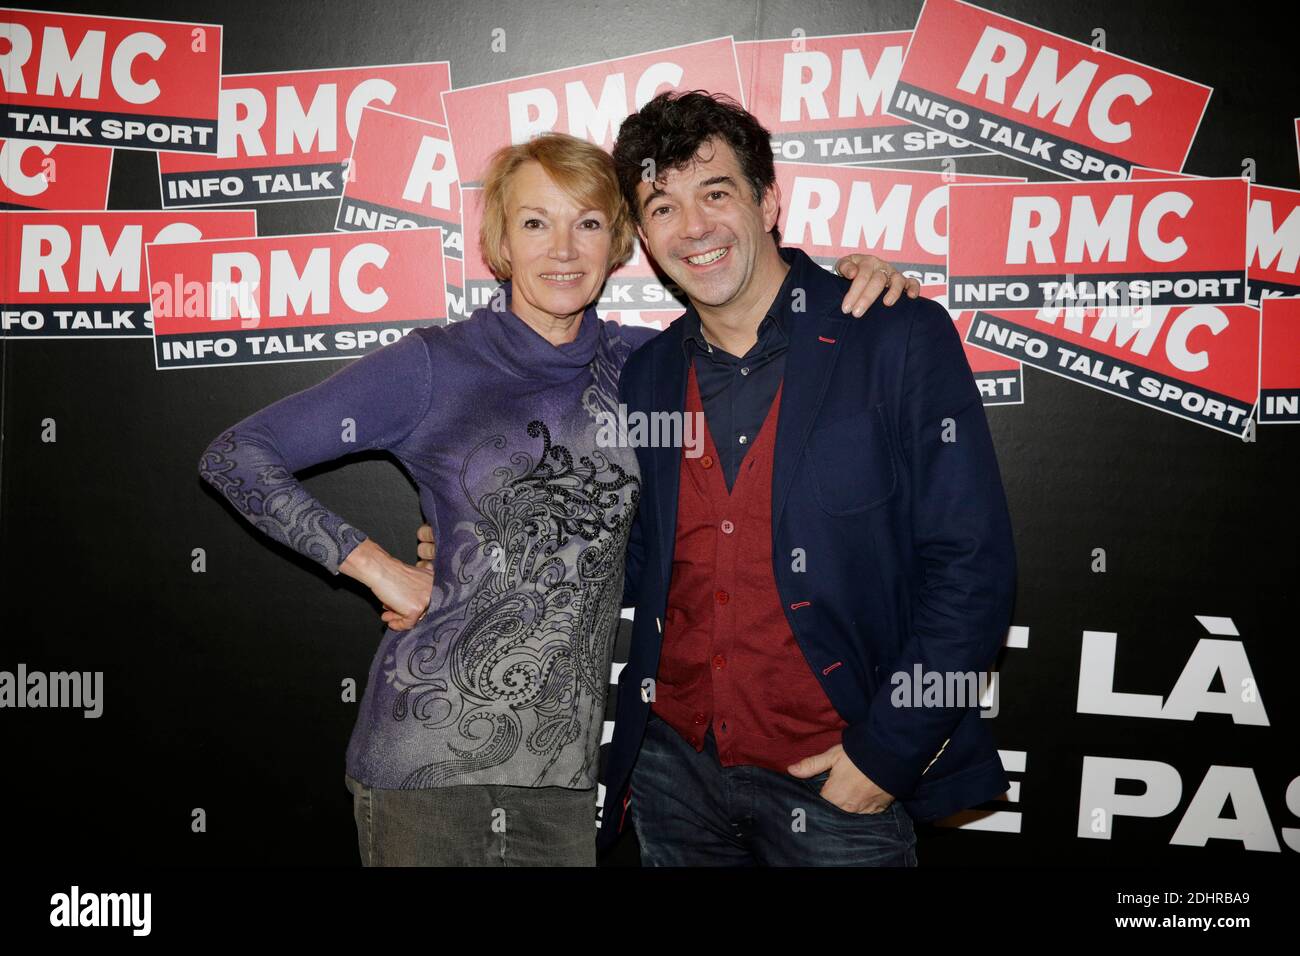 Exclusive. Stephane Plaza is interviewed by Brigitte Lahaie on RMC radio in  Paris, France, March 08, 2016. Photo by Jerome Domine/ABACAPRESS.COM Stock  Photo - Alamy